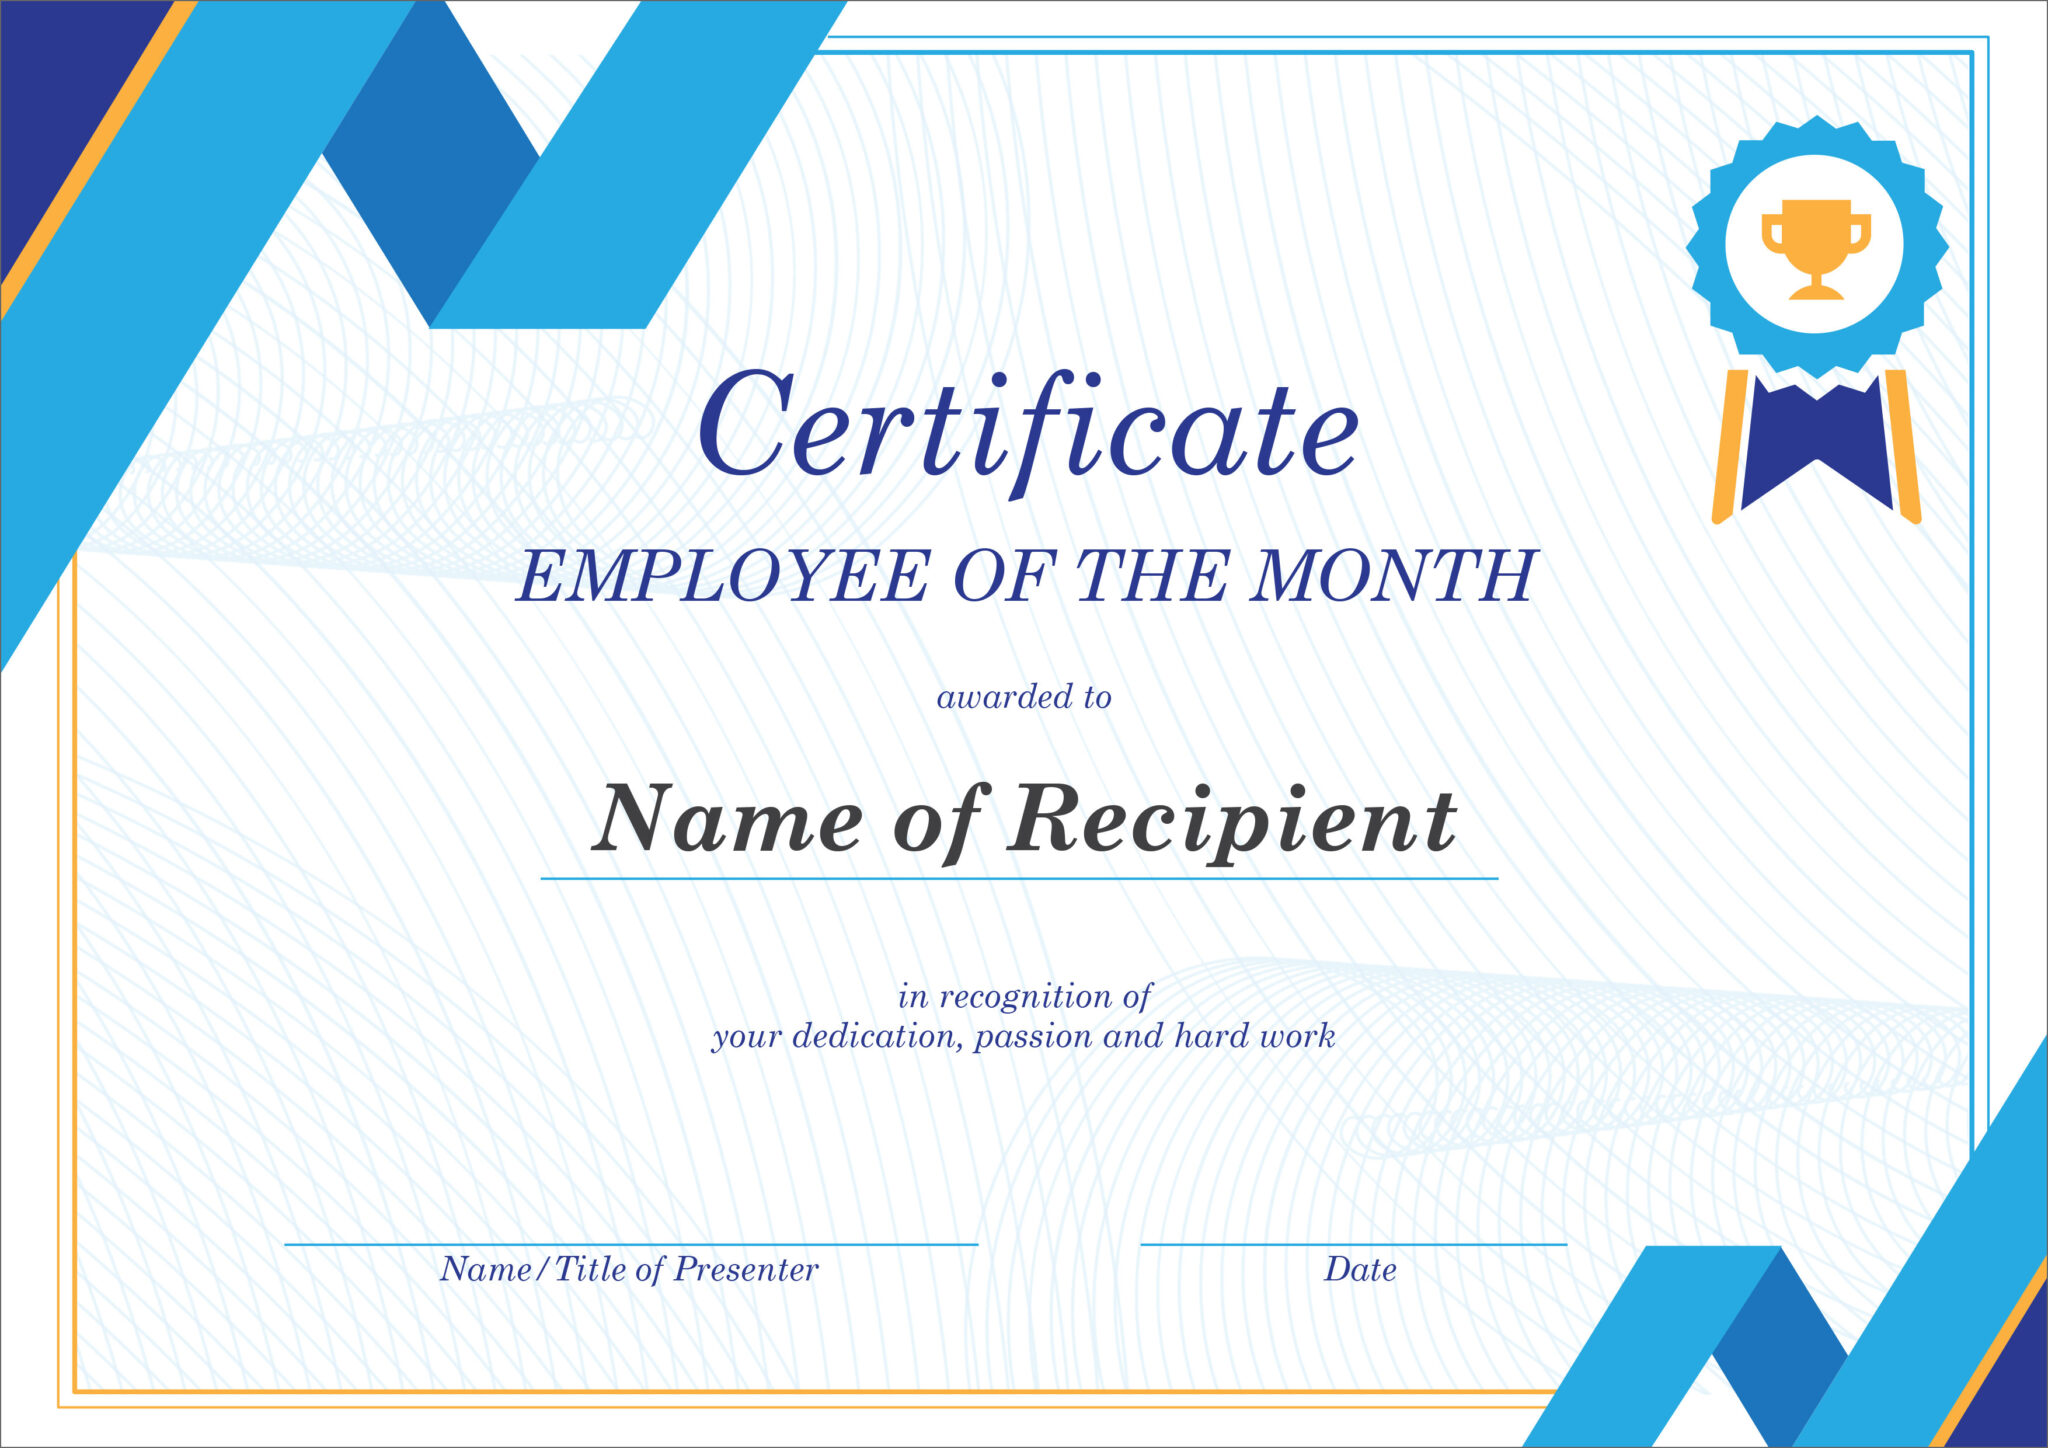 50-free-creative-blank-certificate-templates-in-psd-pertaining-to-employee-of-the-month